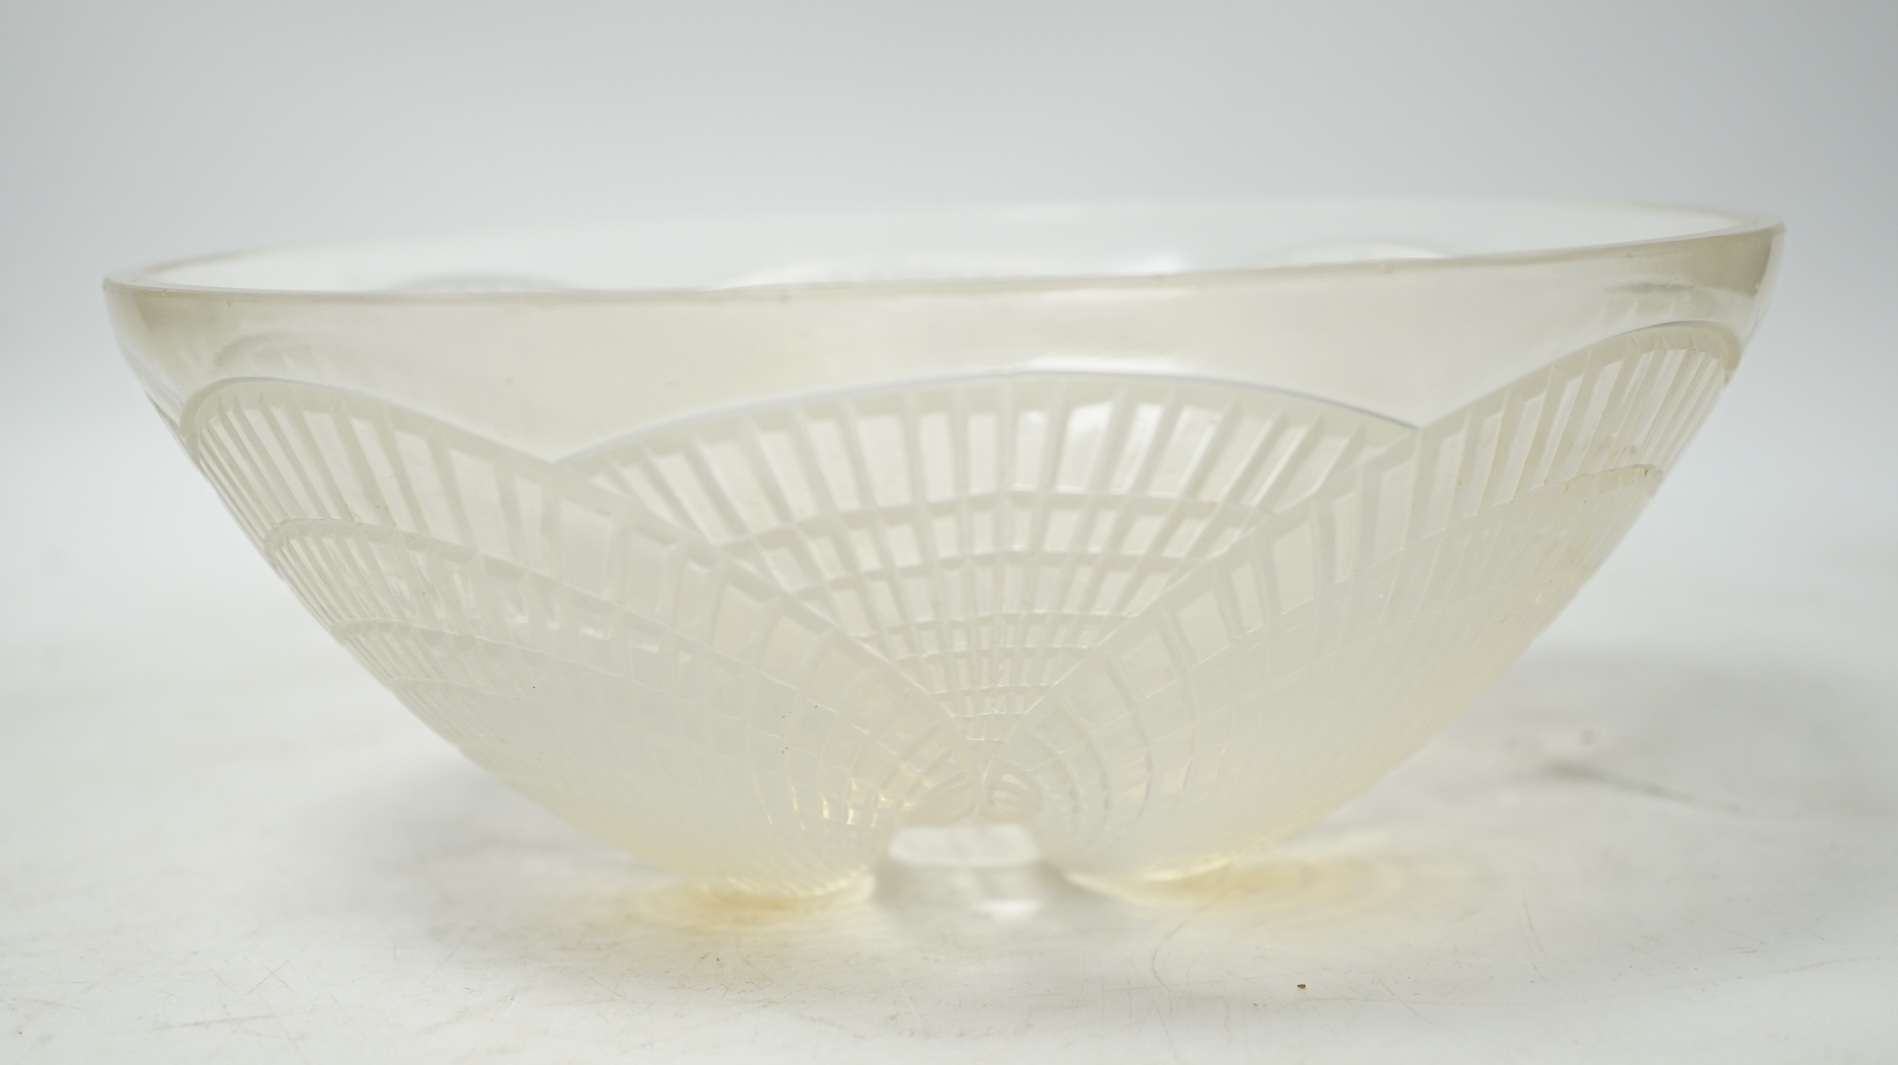 René Lalique, a Coquilles pattern opalescent glass bowl, engraved shape number 3201, 21cm diameter. Condition - tiny rim nicks, otherwise good